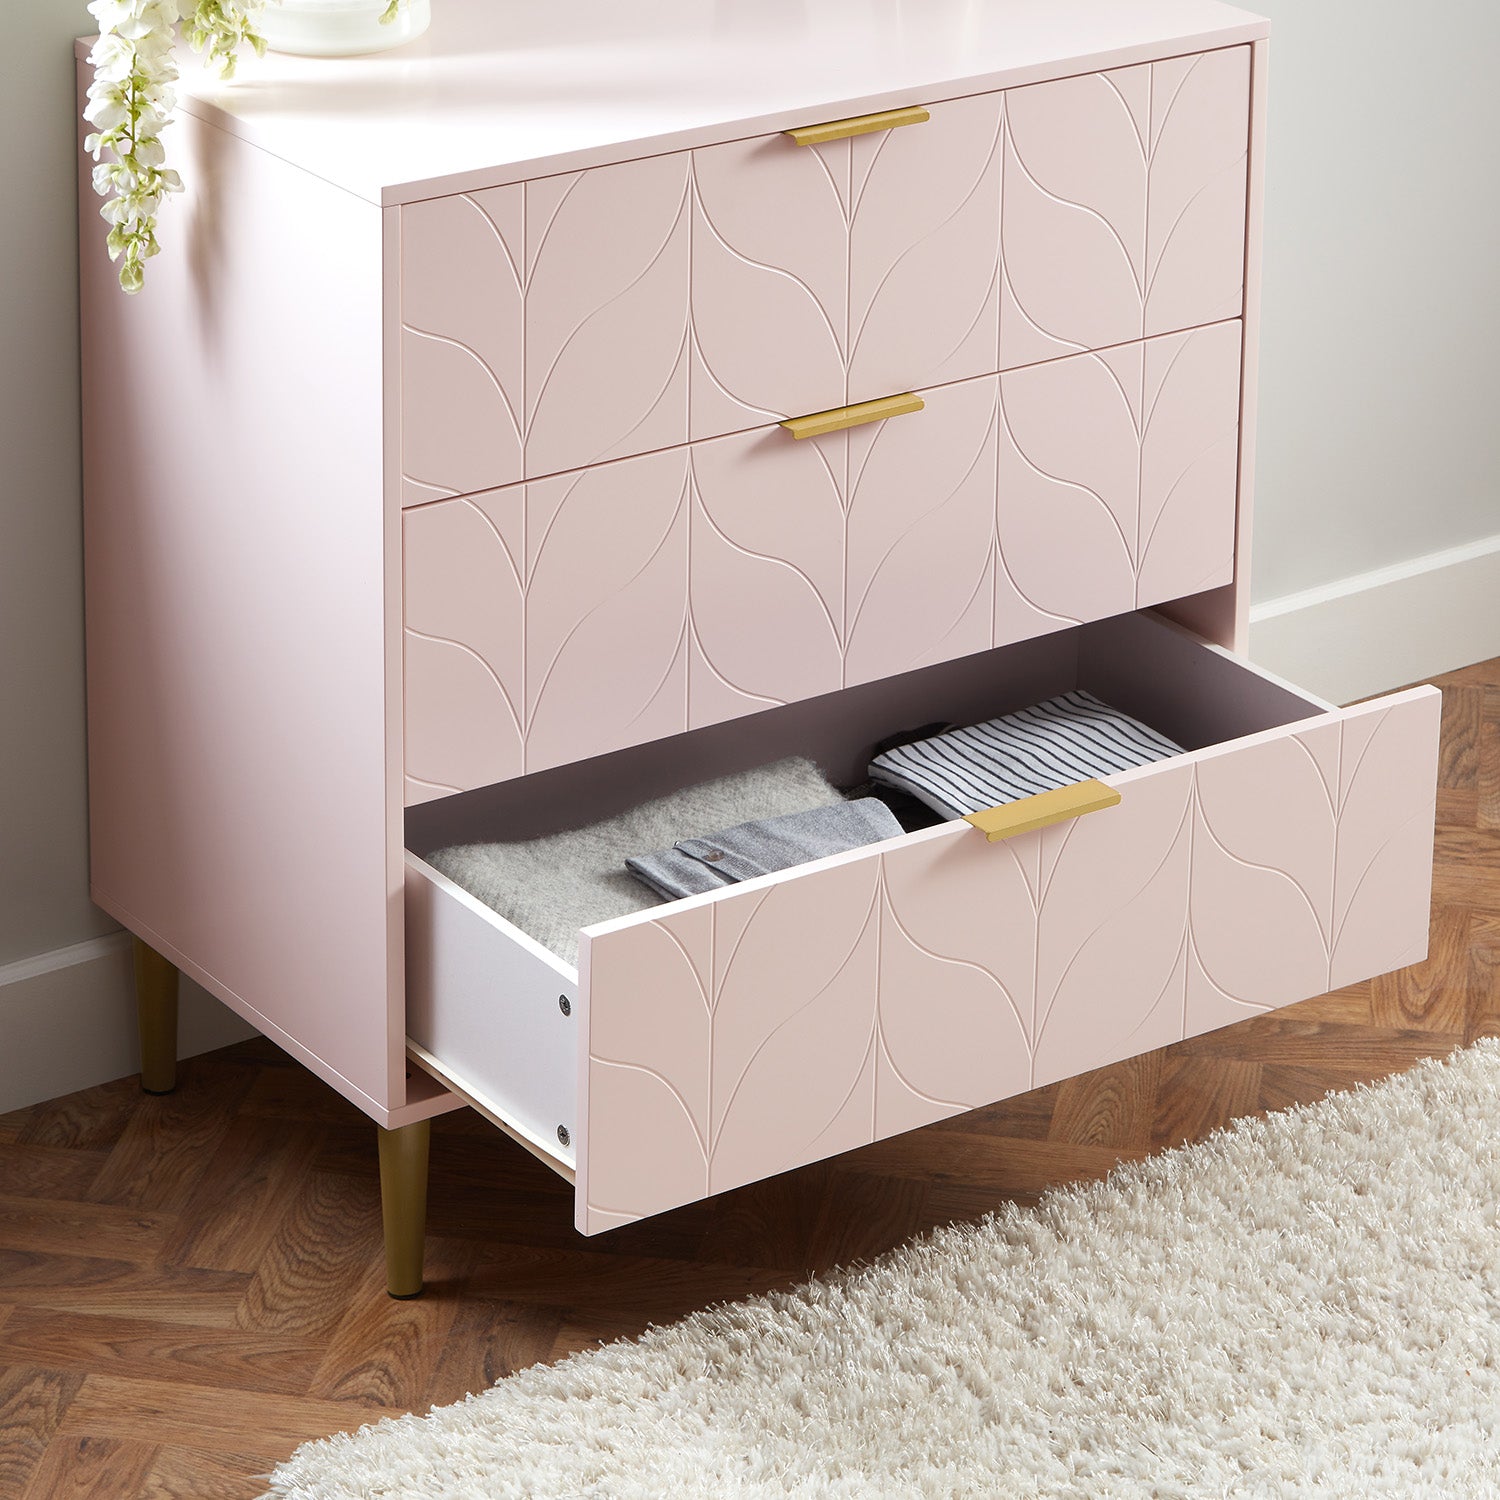 Gloria 4 piece bedroom furniture set - 3 drawer chest of drawers - pale pink - Laura James